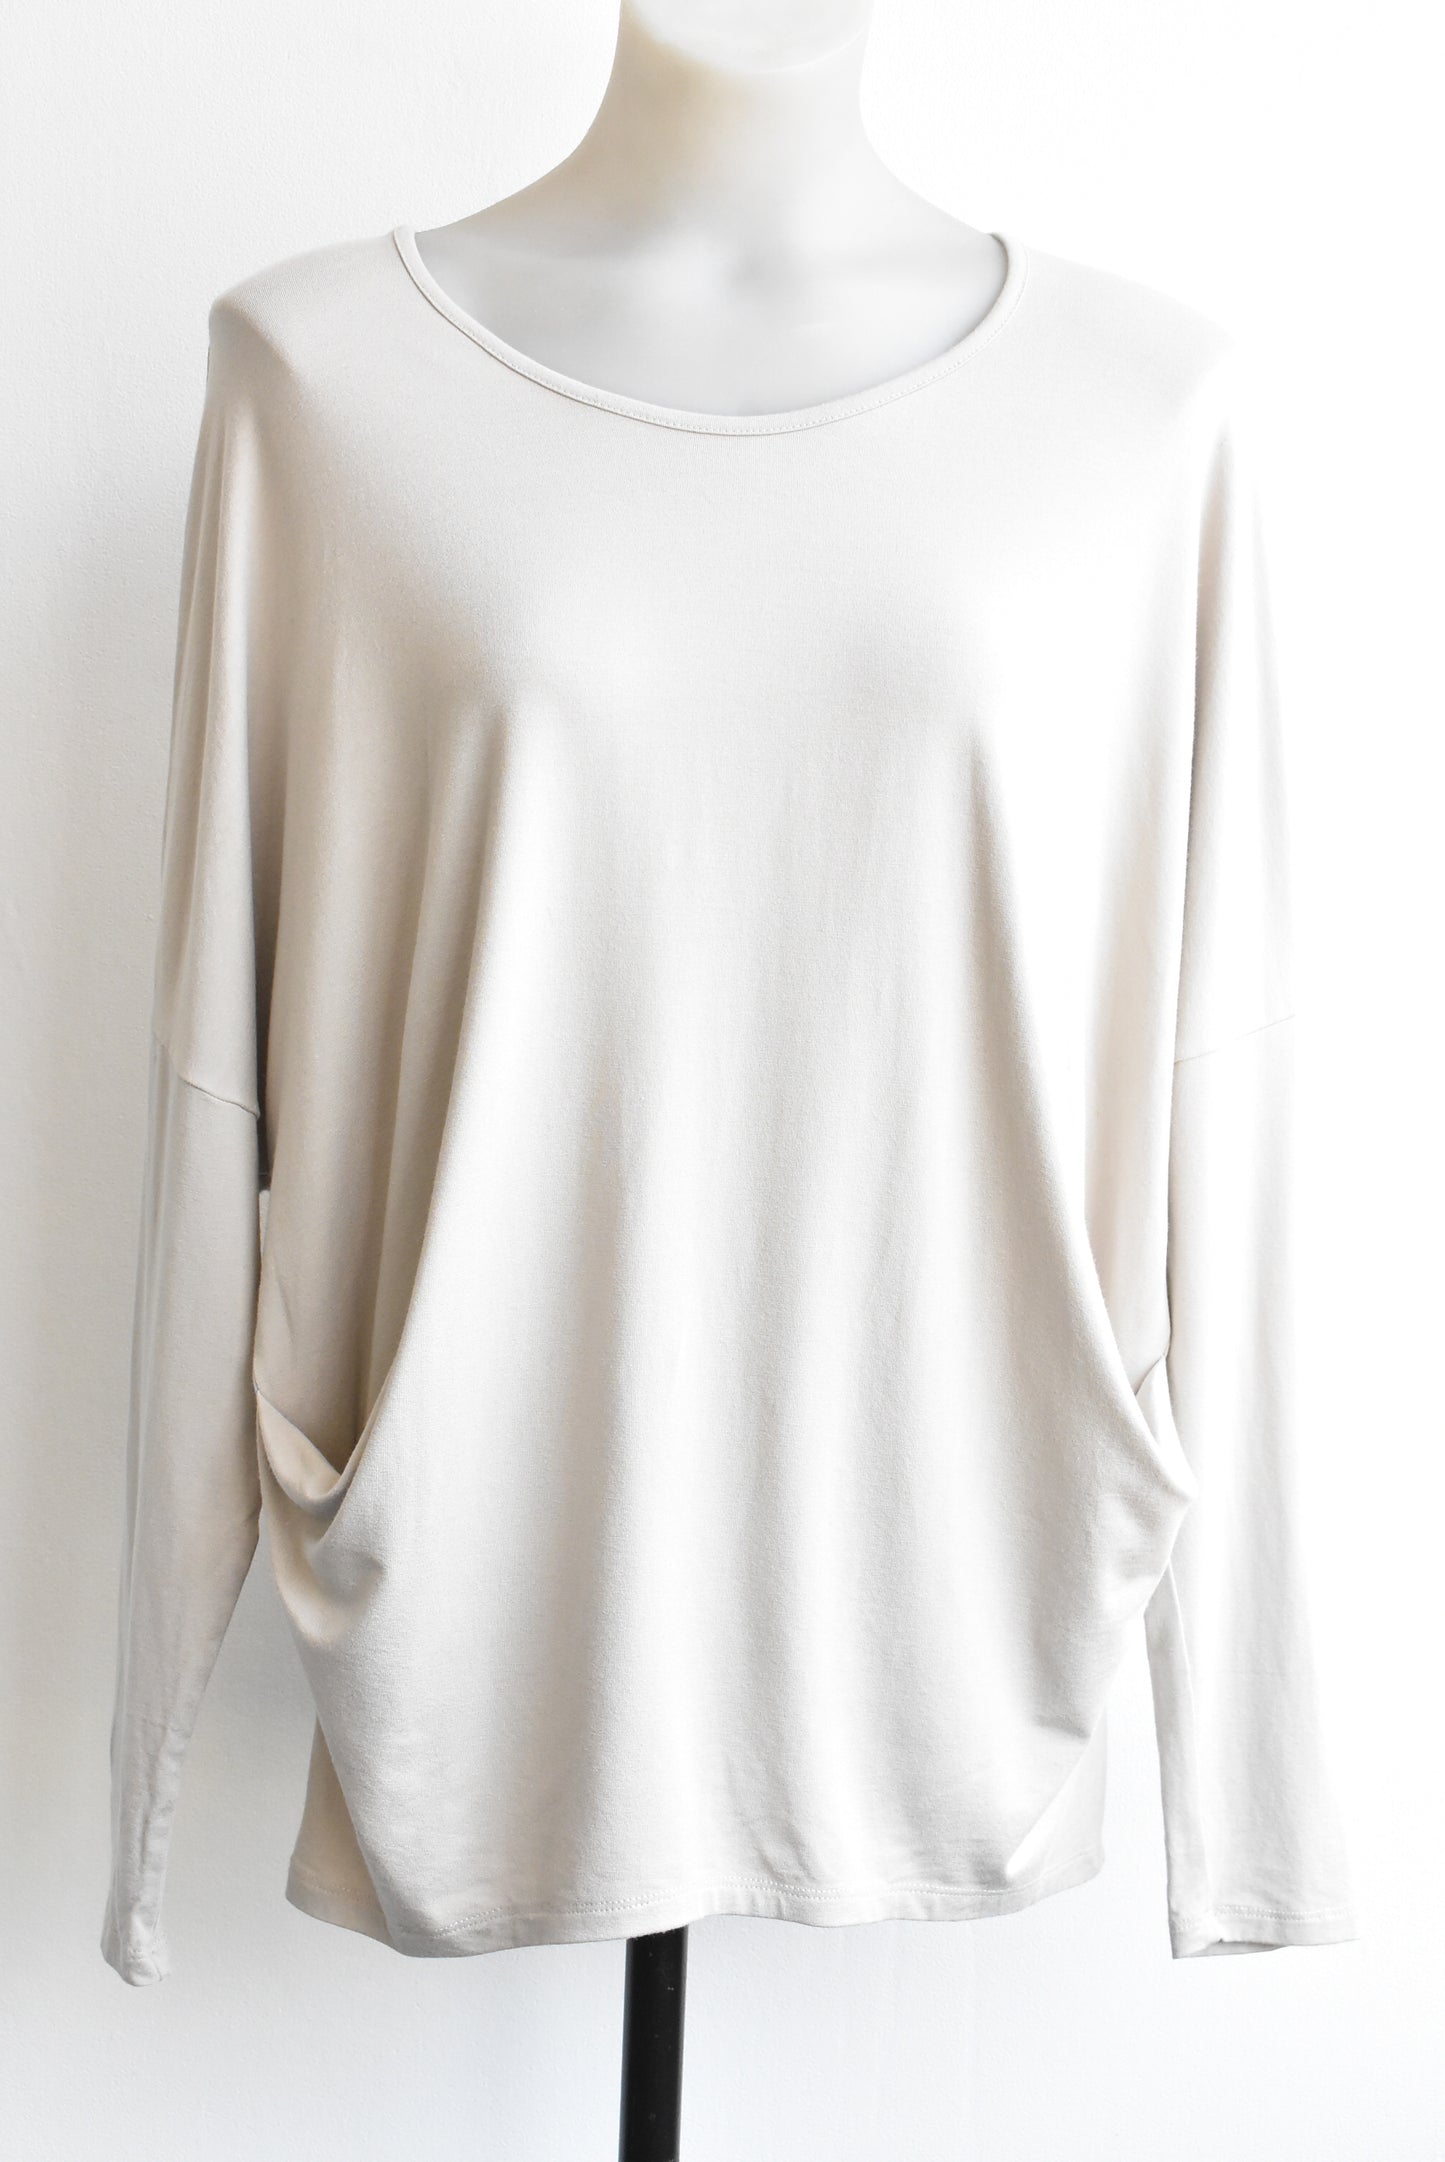 Relaxed side-tuck dolman sleeved grey top, size L